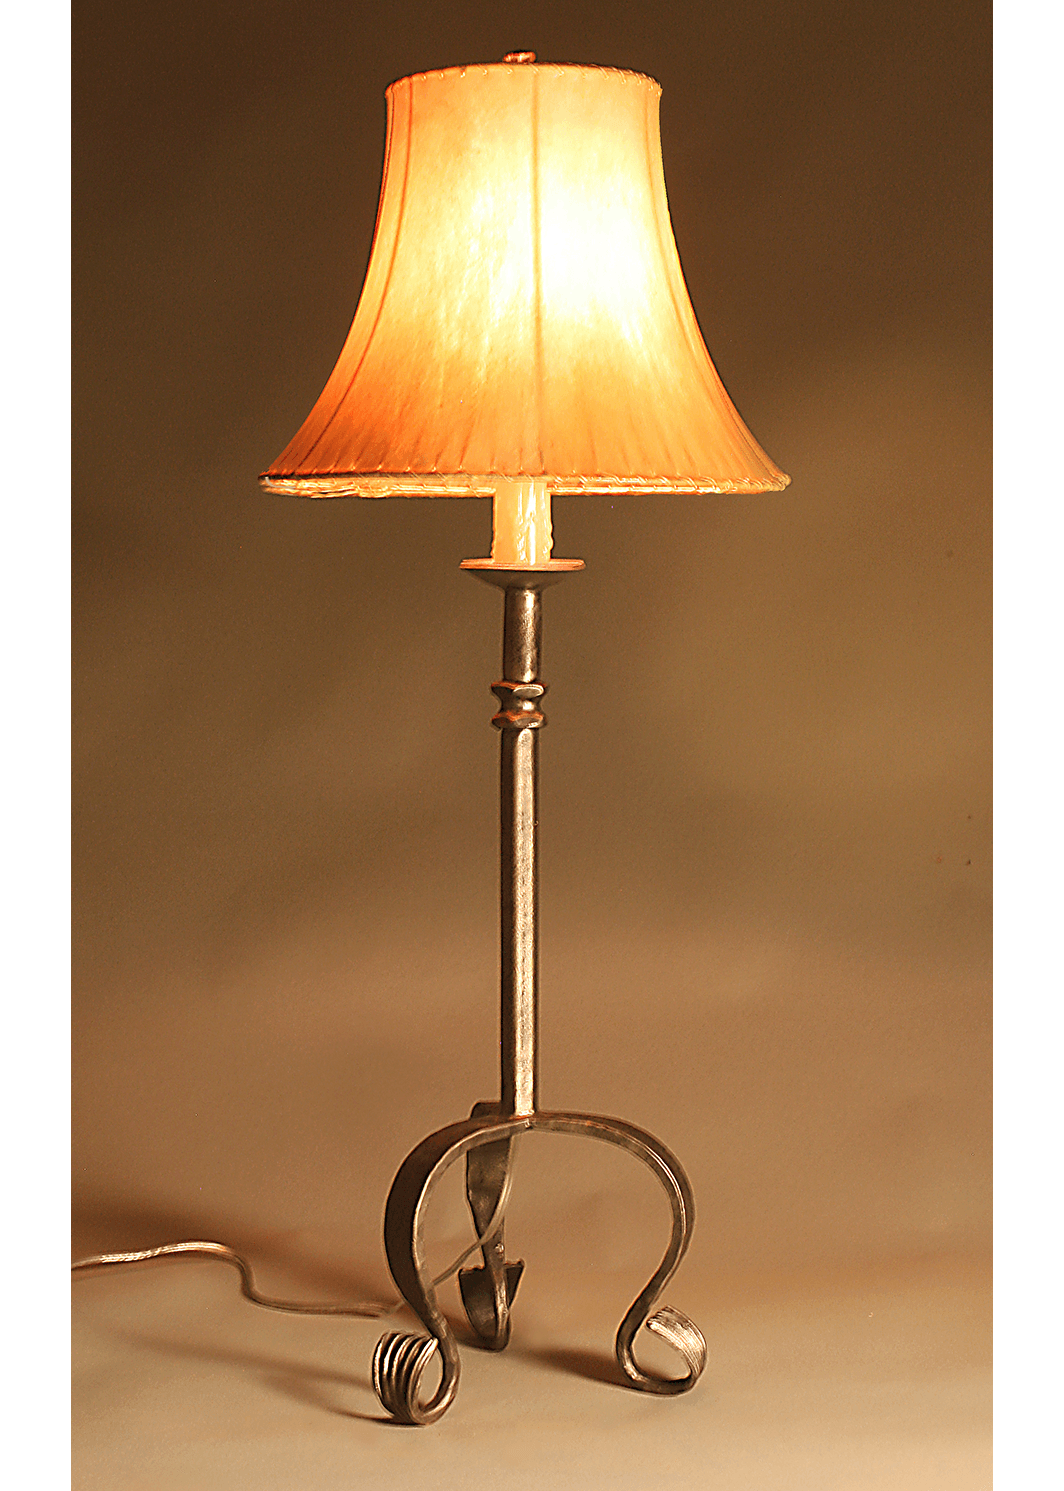 Le Dordogne Lamp with Flair Sheepskin Shade by Christopher Thomson Ironworks